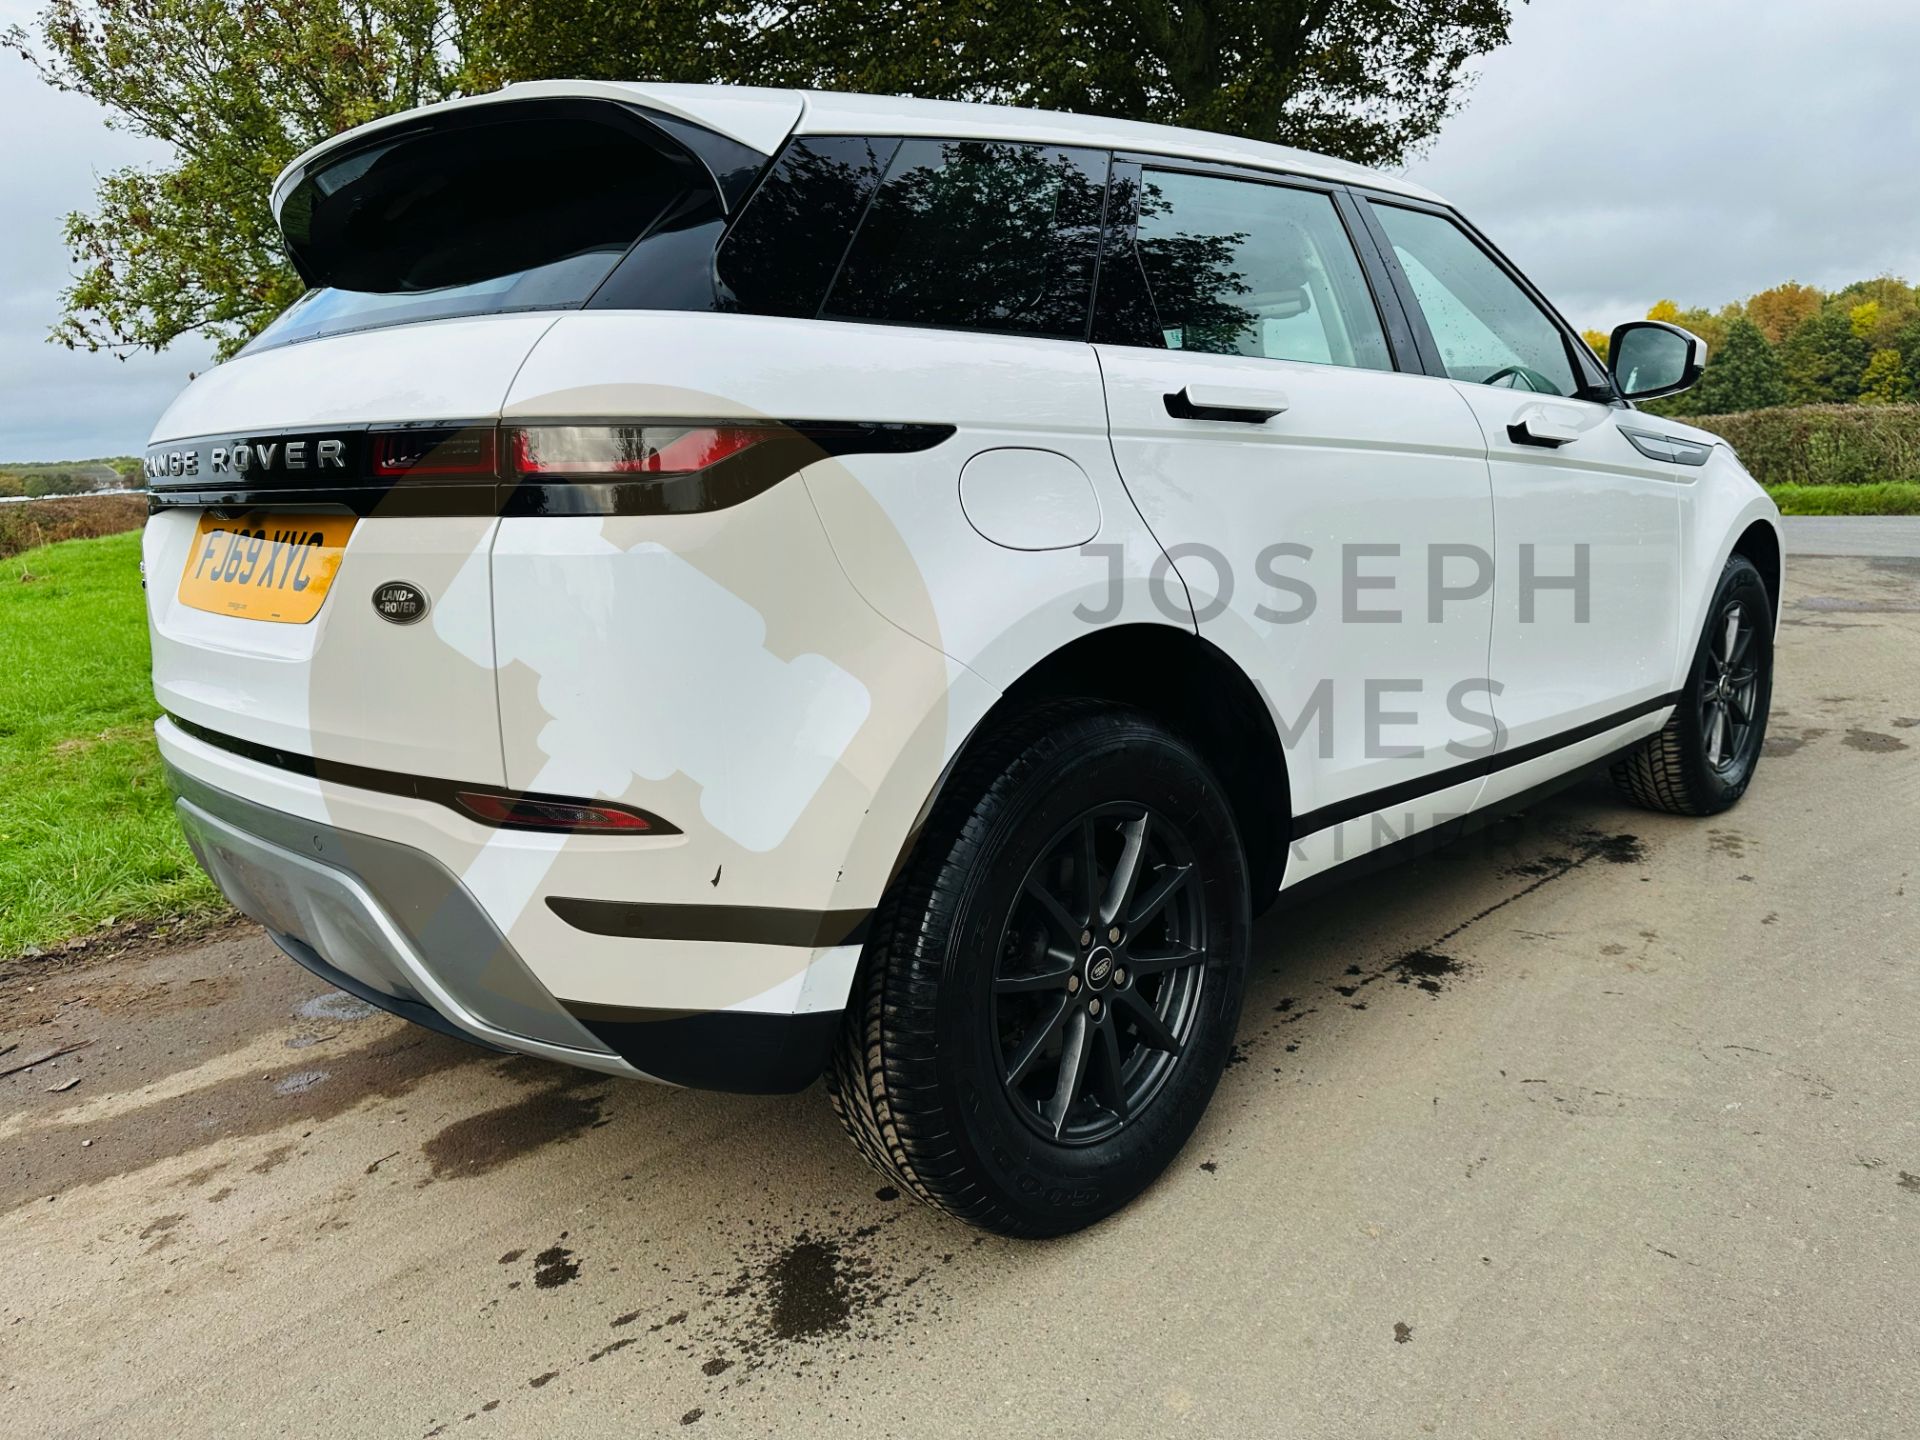 (ON SALE) LAND ROVER RANGE ROVER EVOQUE 2.0d AUTO-START STOP (2020 MODEL) ONLY 33K MILES FROM NEW - Image 14 of 41